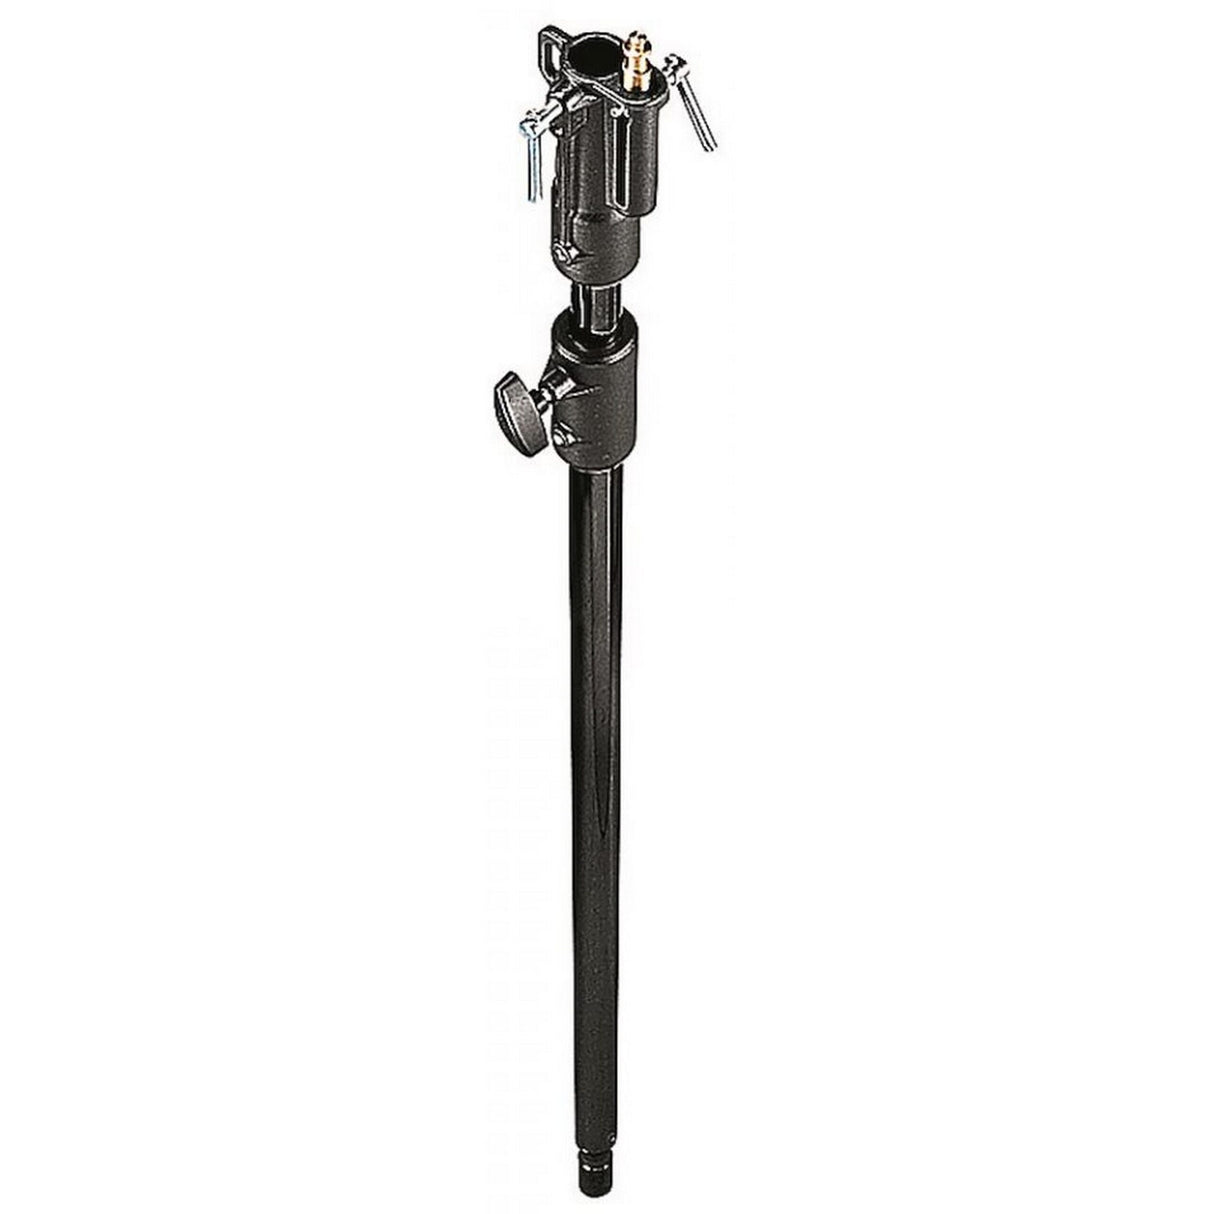 Manfrotto 142B Aluminium Stand Extension 49-82.6 Inches, Black